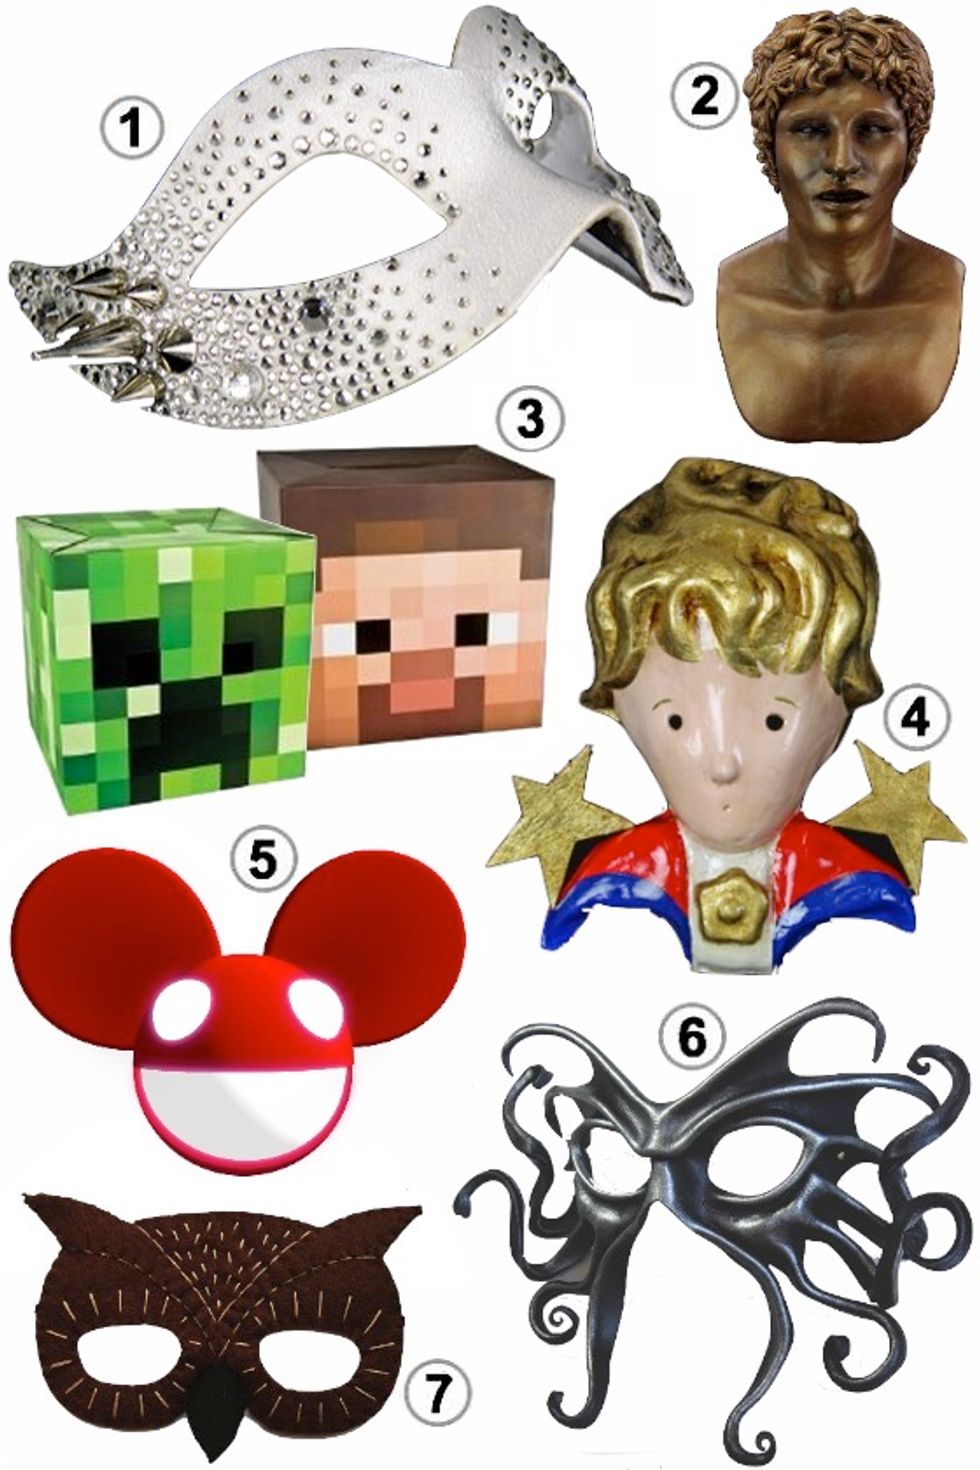 Look of the Week: The Best Masks for Halloween